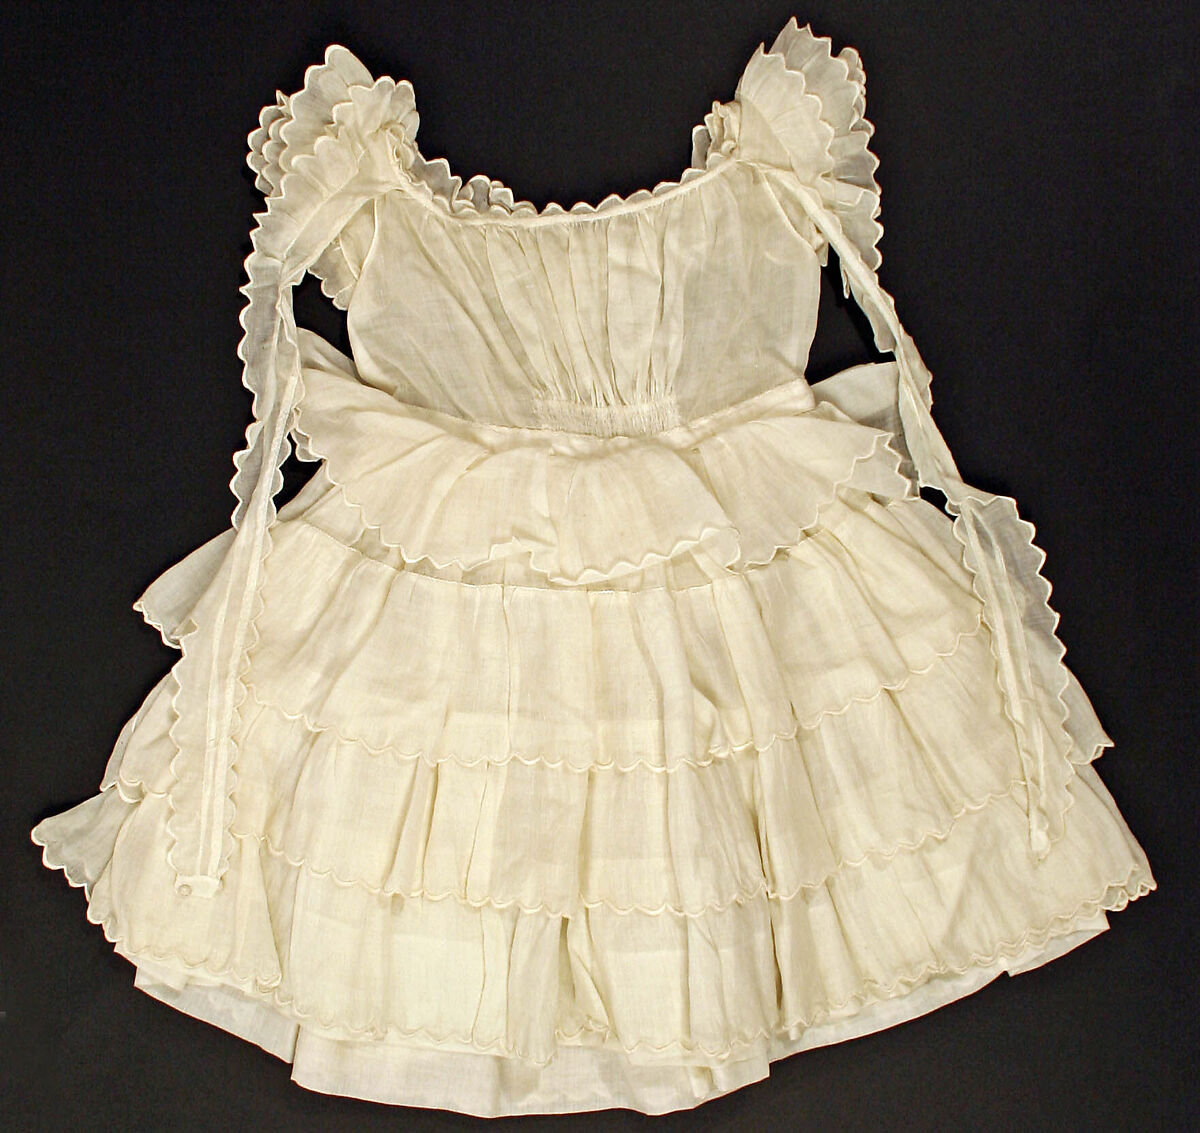 Dress, cotton, probably American 